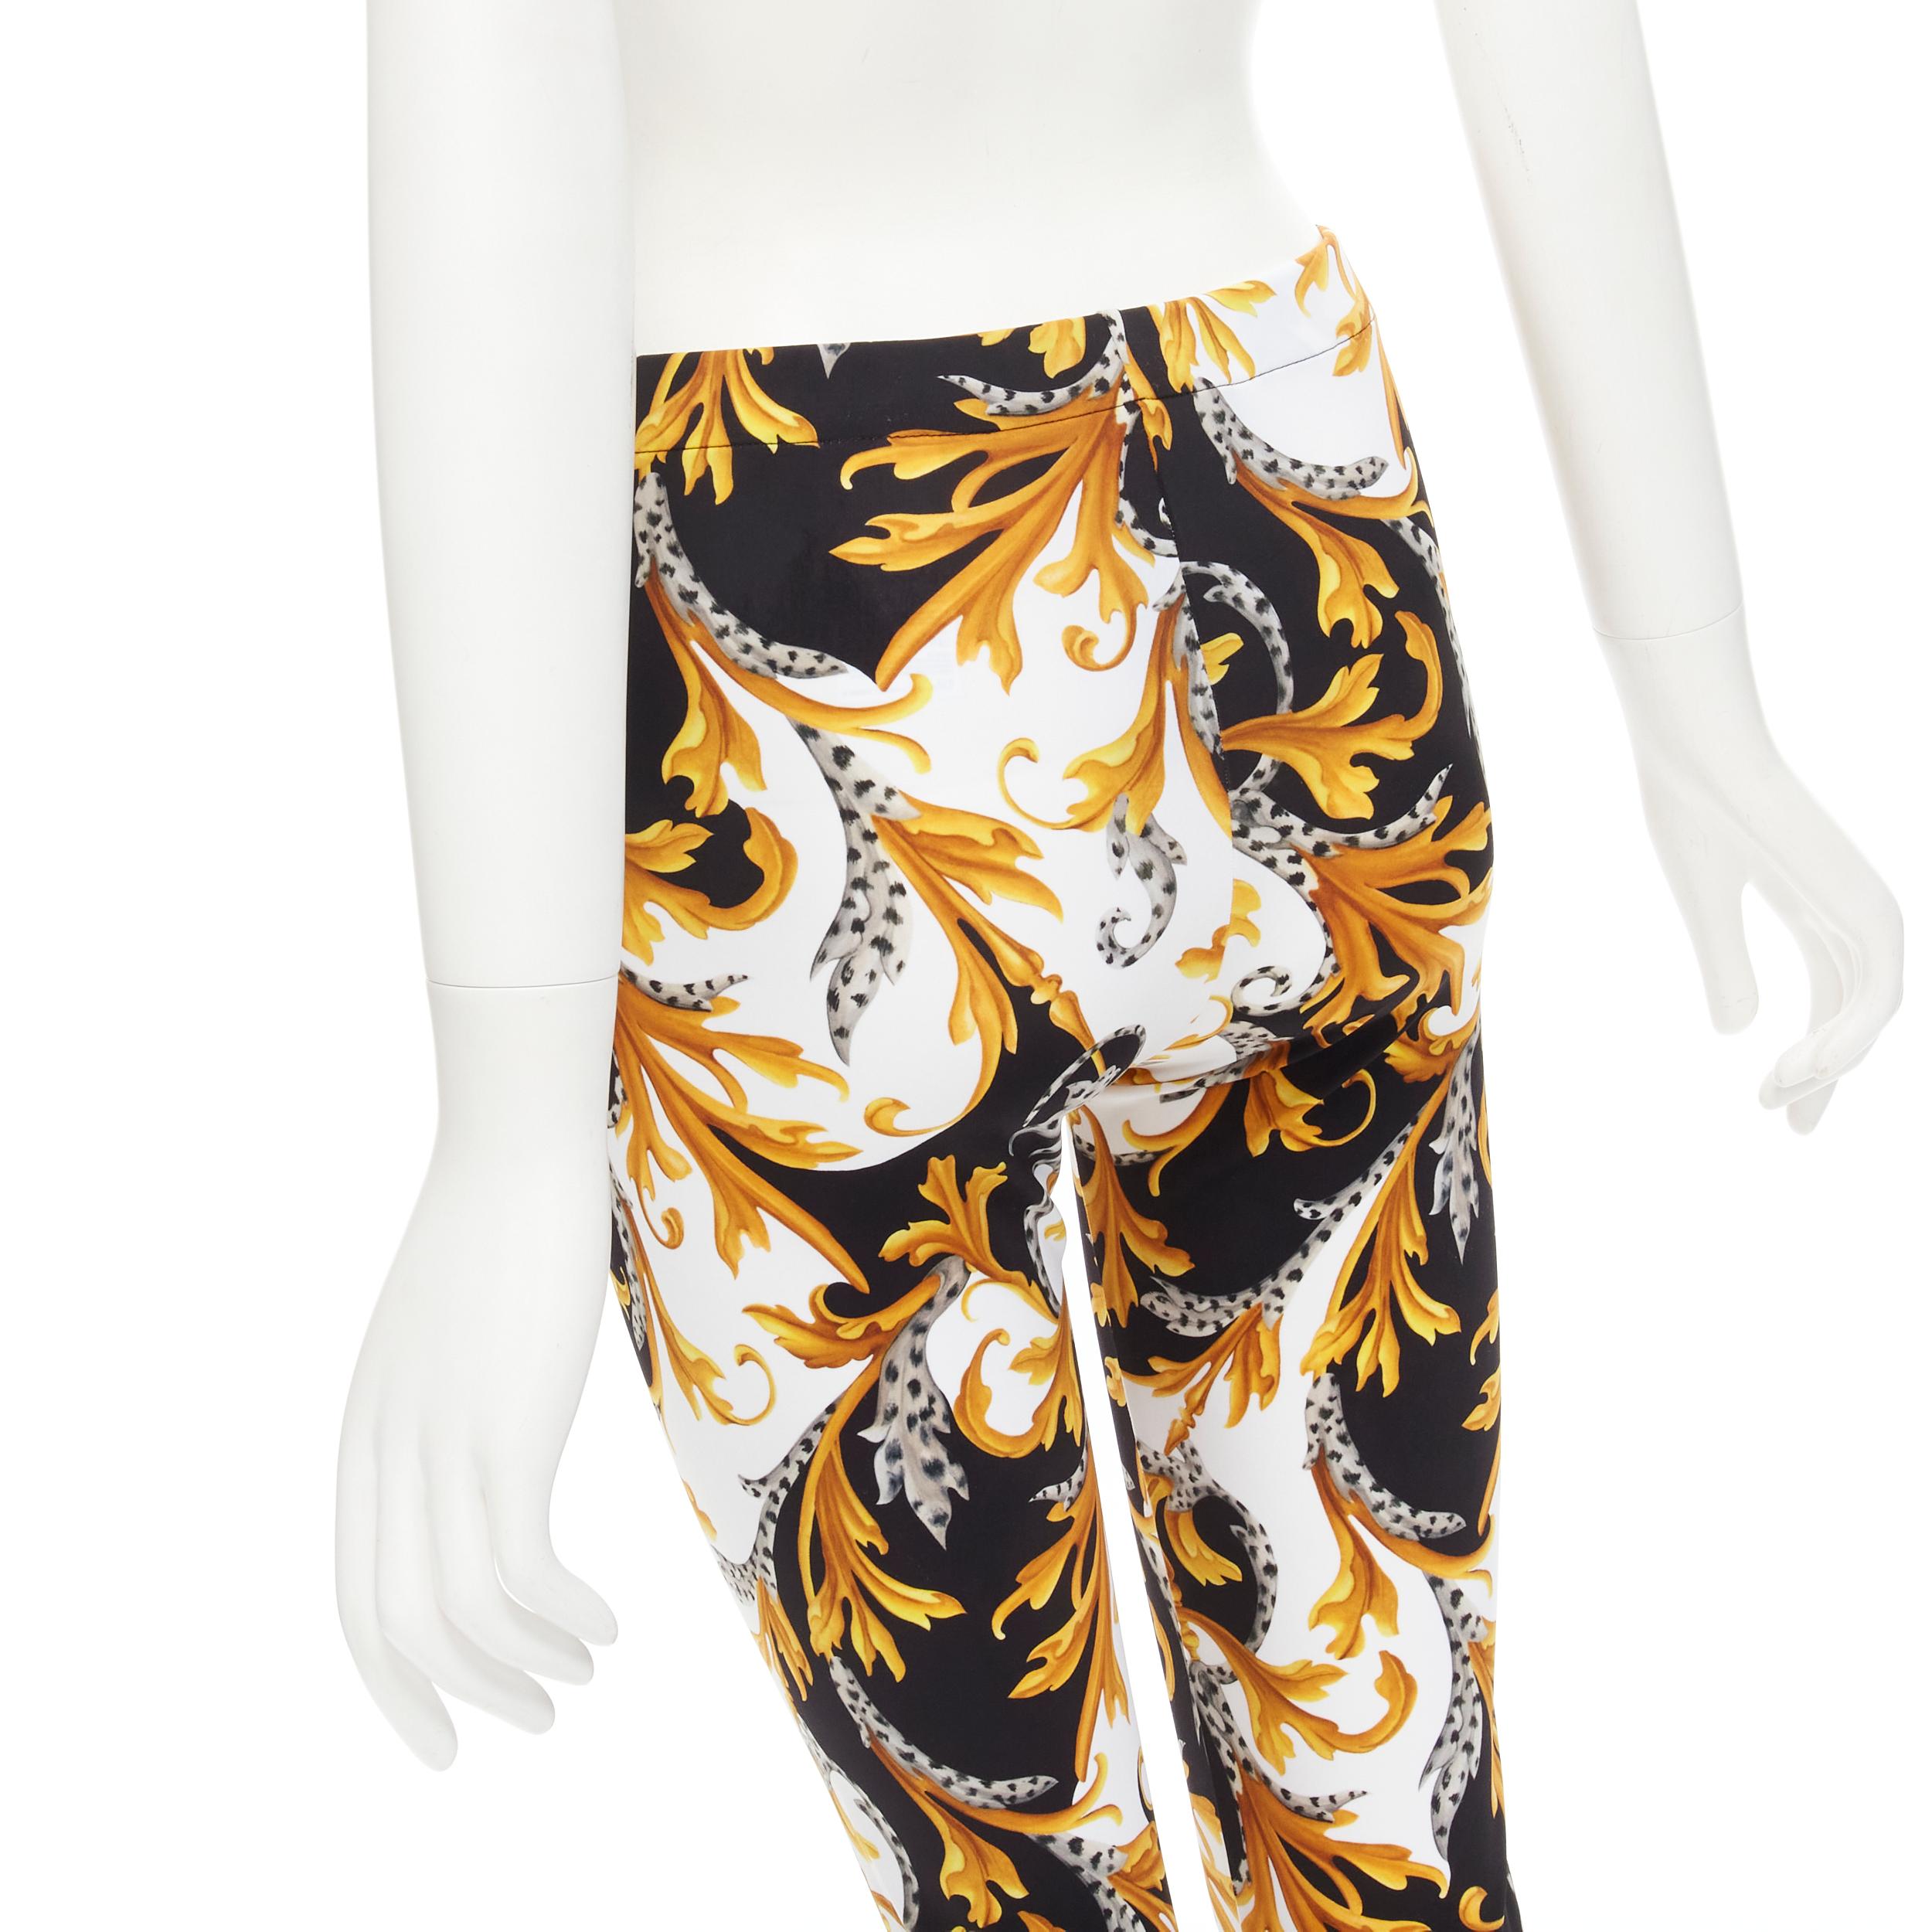 new VERSACE Barocco Acanthus black gold floral print stretchy leggings IT42 M 4